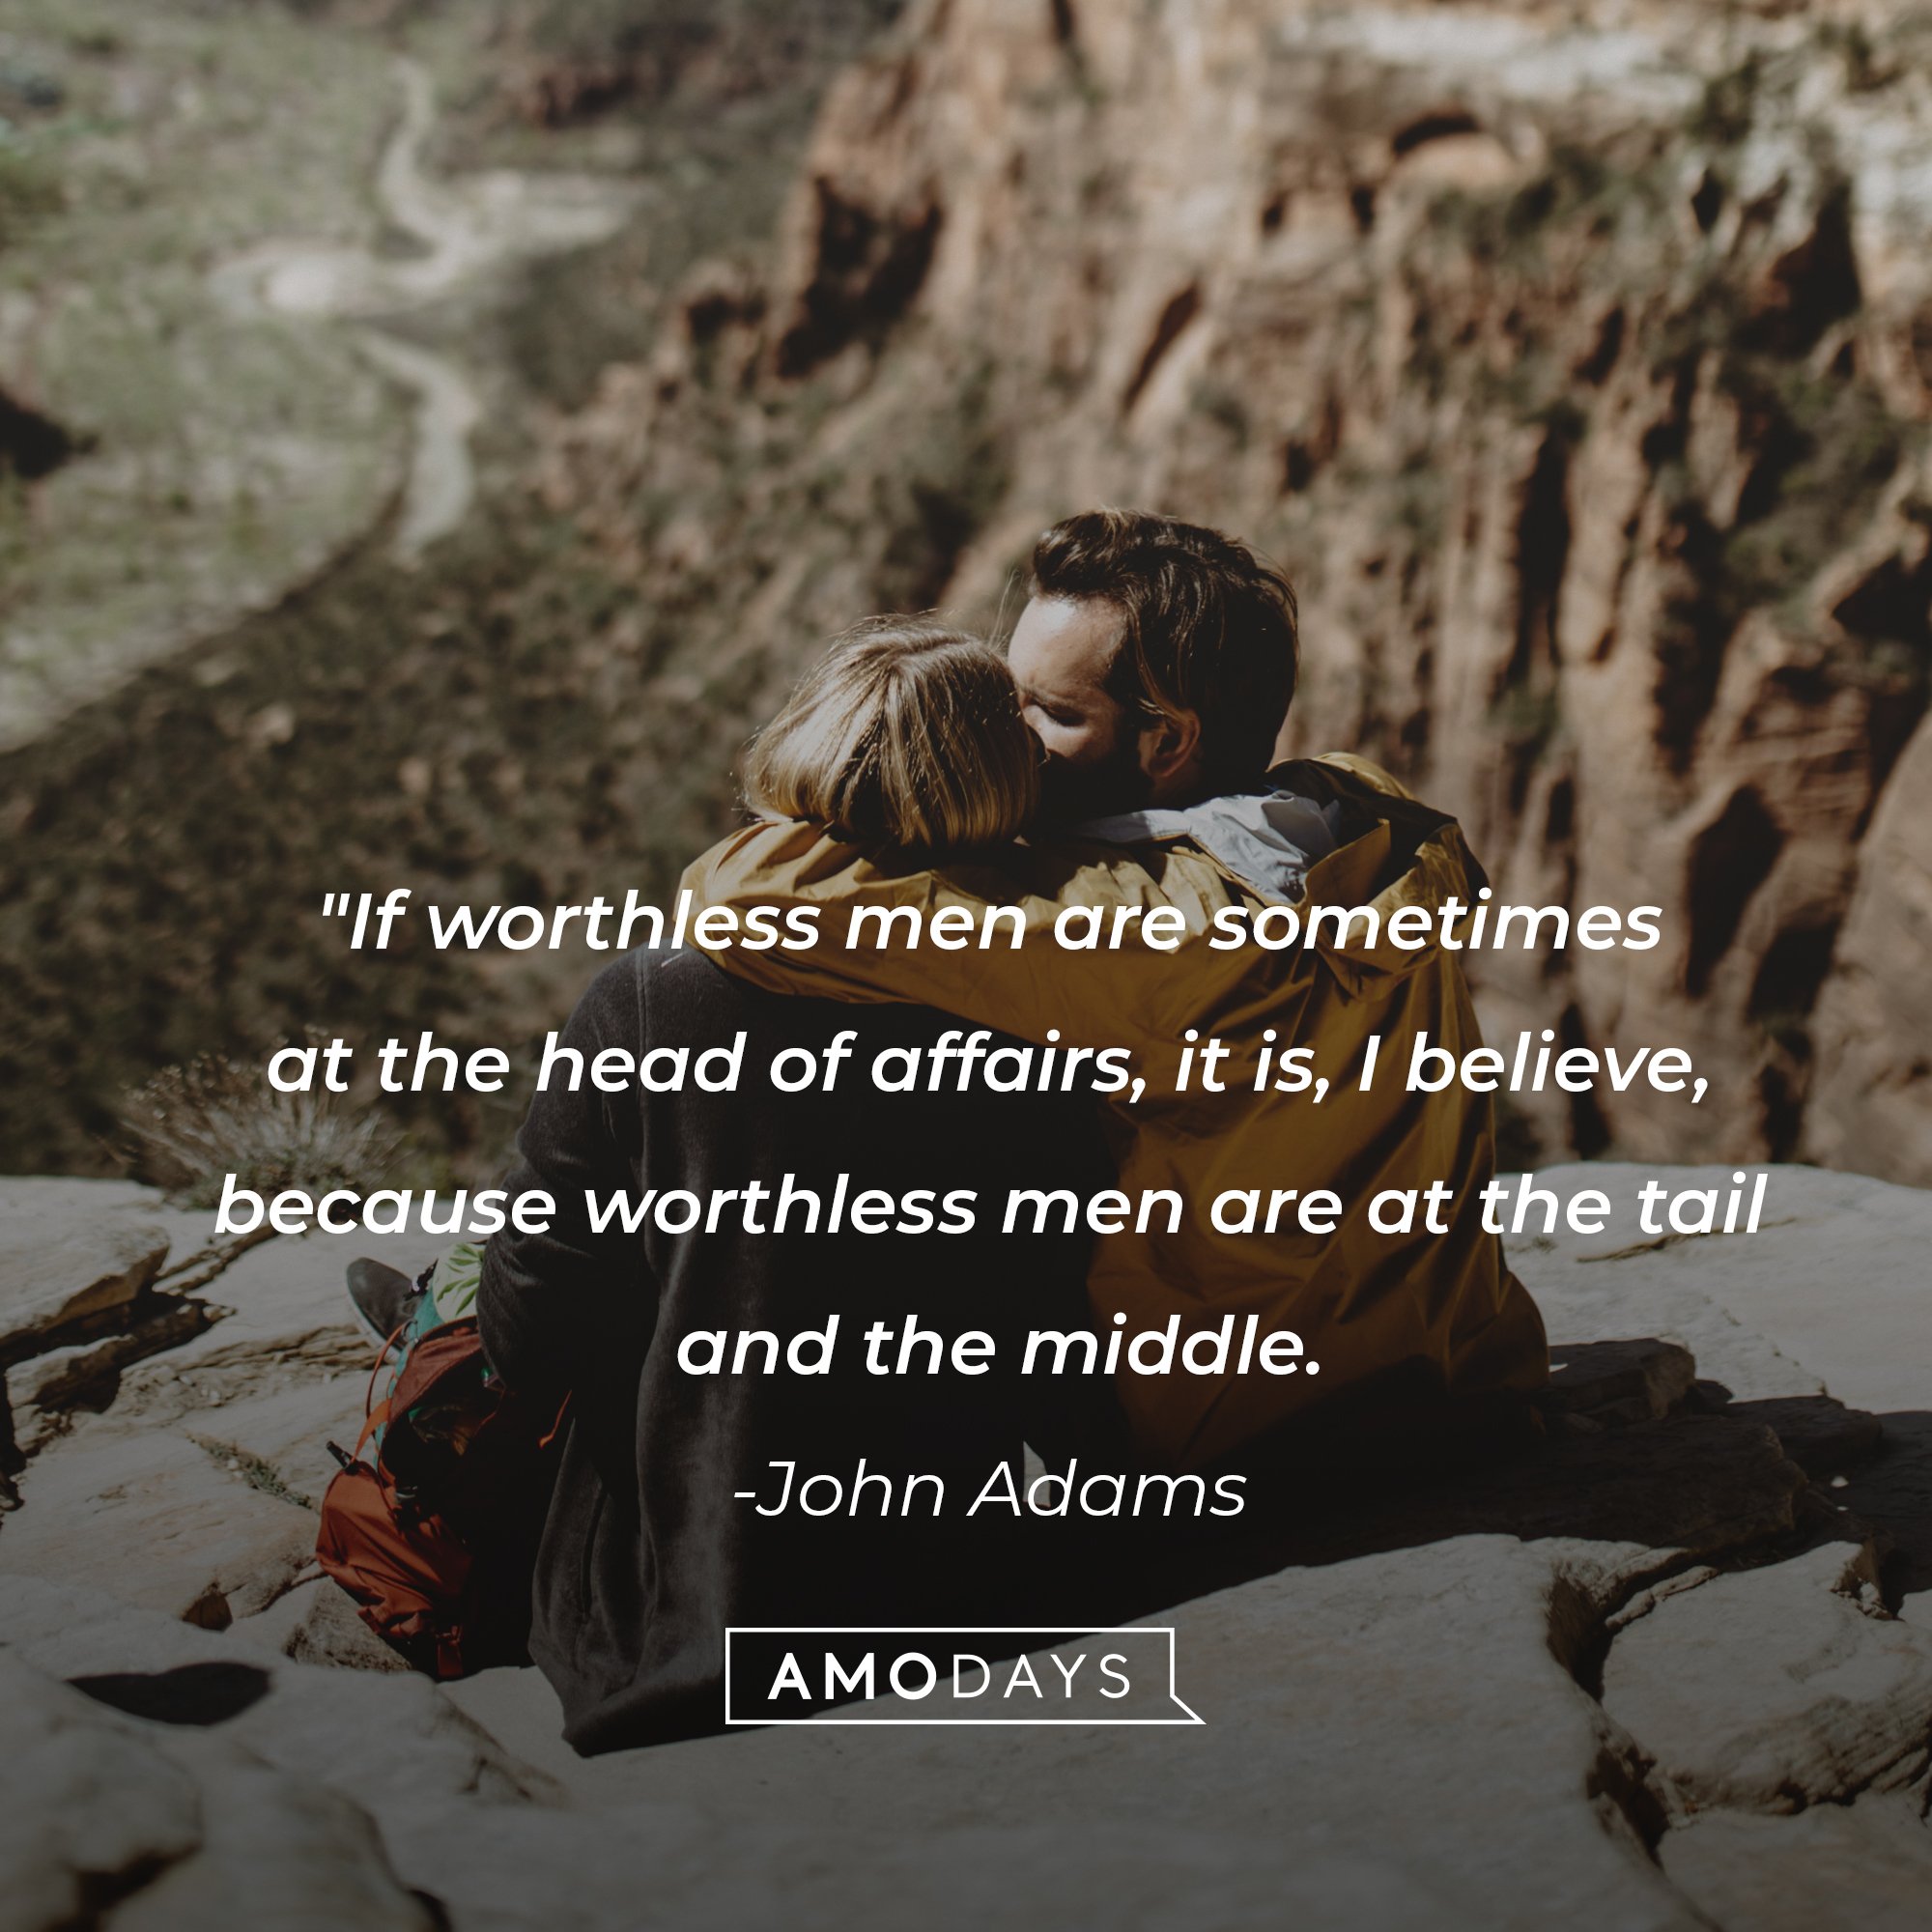 John Adams' quote: "If worthless men are sometimes at the head of affairs, it is, I believe, because worthless men are at the tail and the middle." | Image: AmoDays